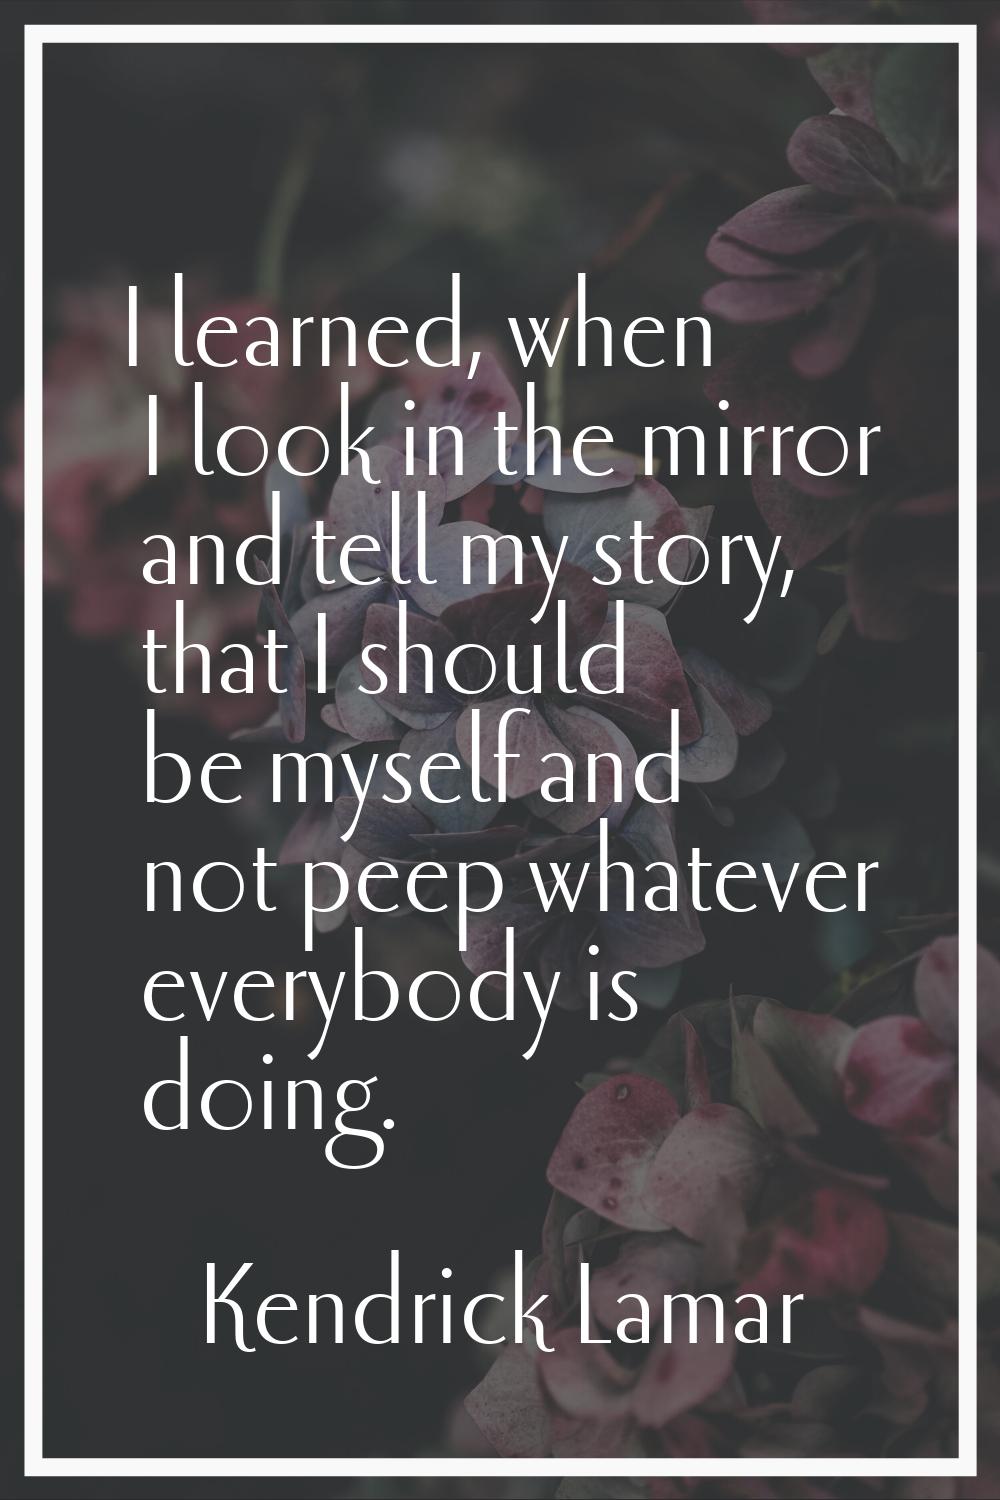 I learned, when I look in the mirror and tell my story, that I should be myself and not peep whatev